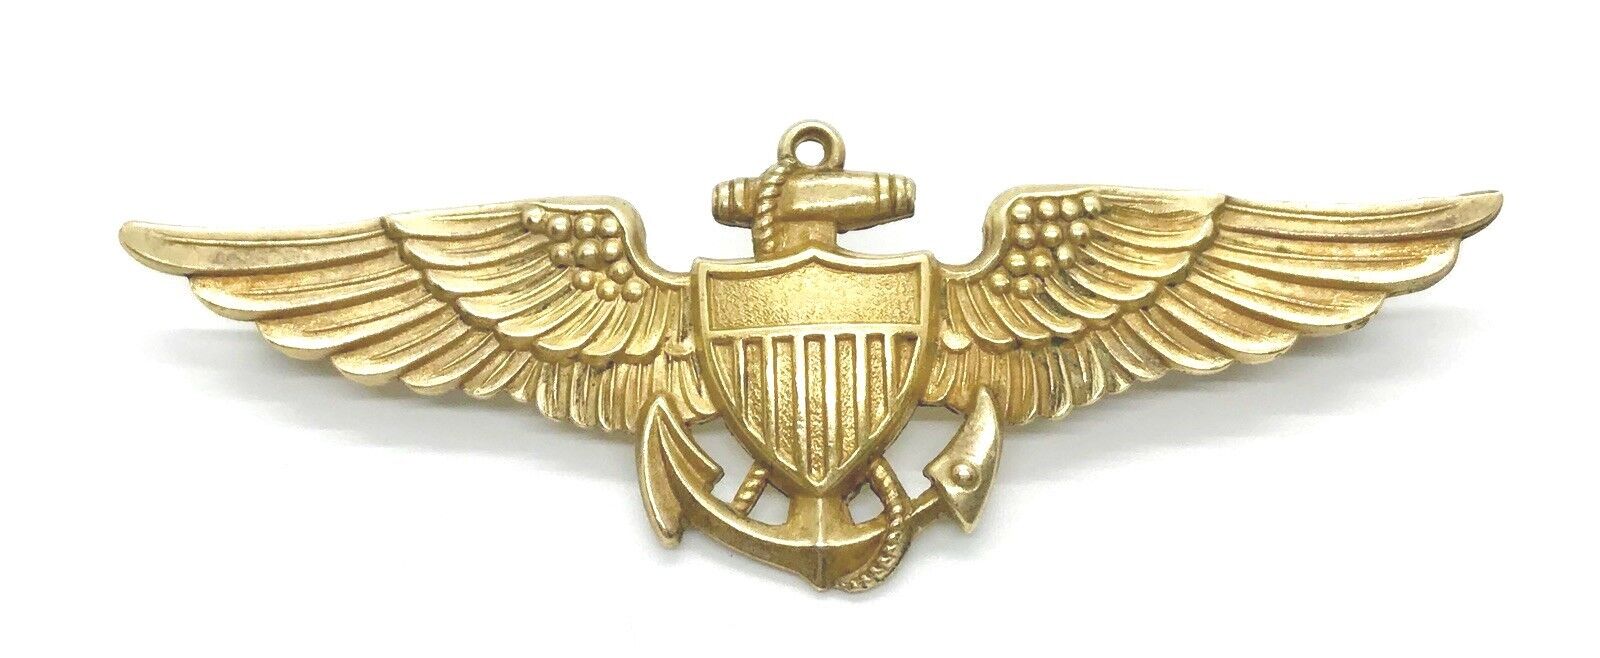 USN NAVY AIR FORCE GOLD FILLED OVER STERLING WINGS PIN VANGUARD